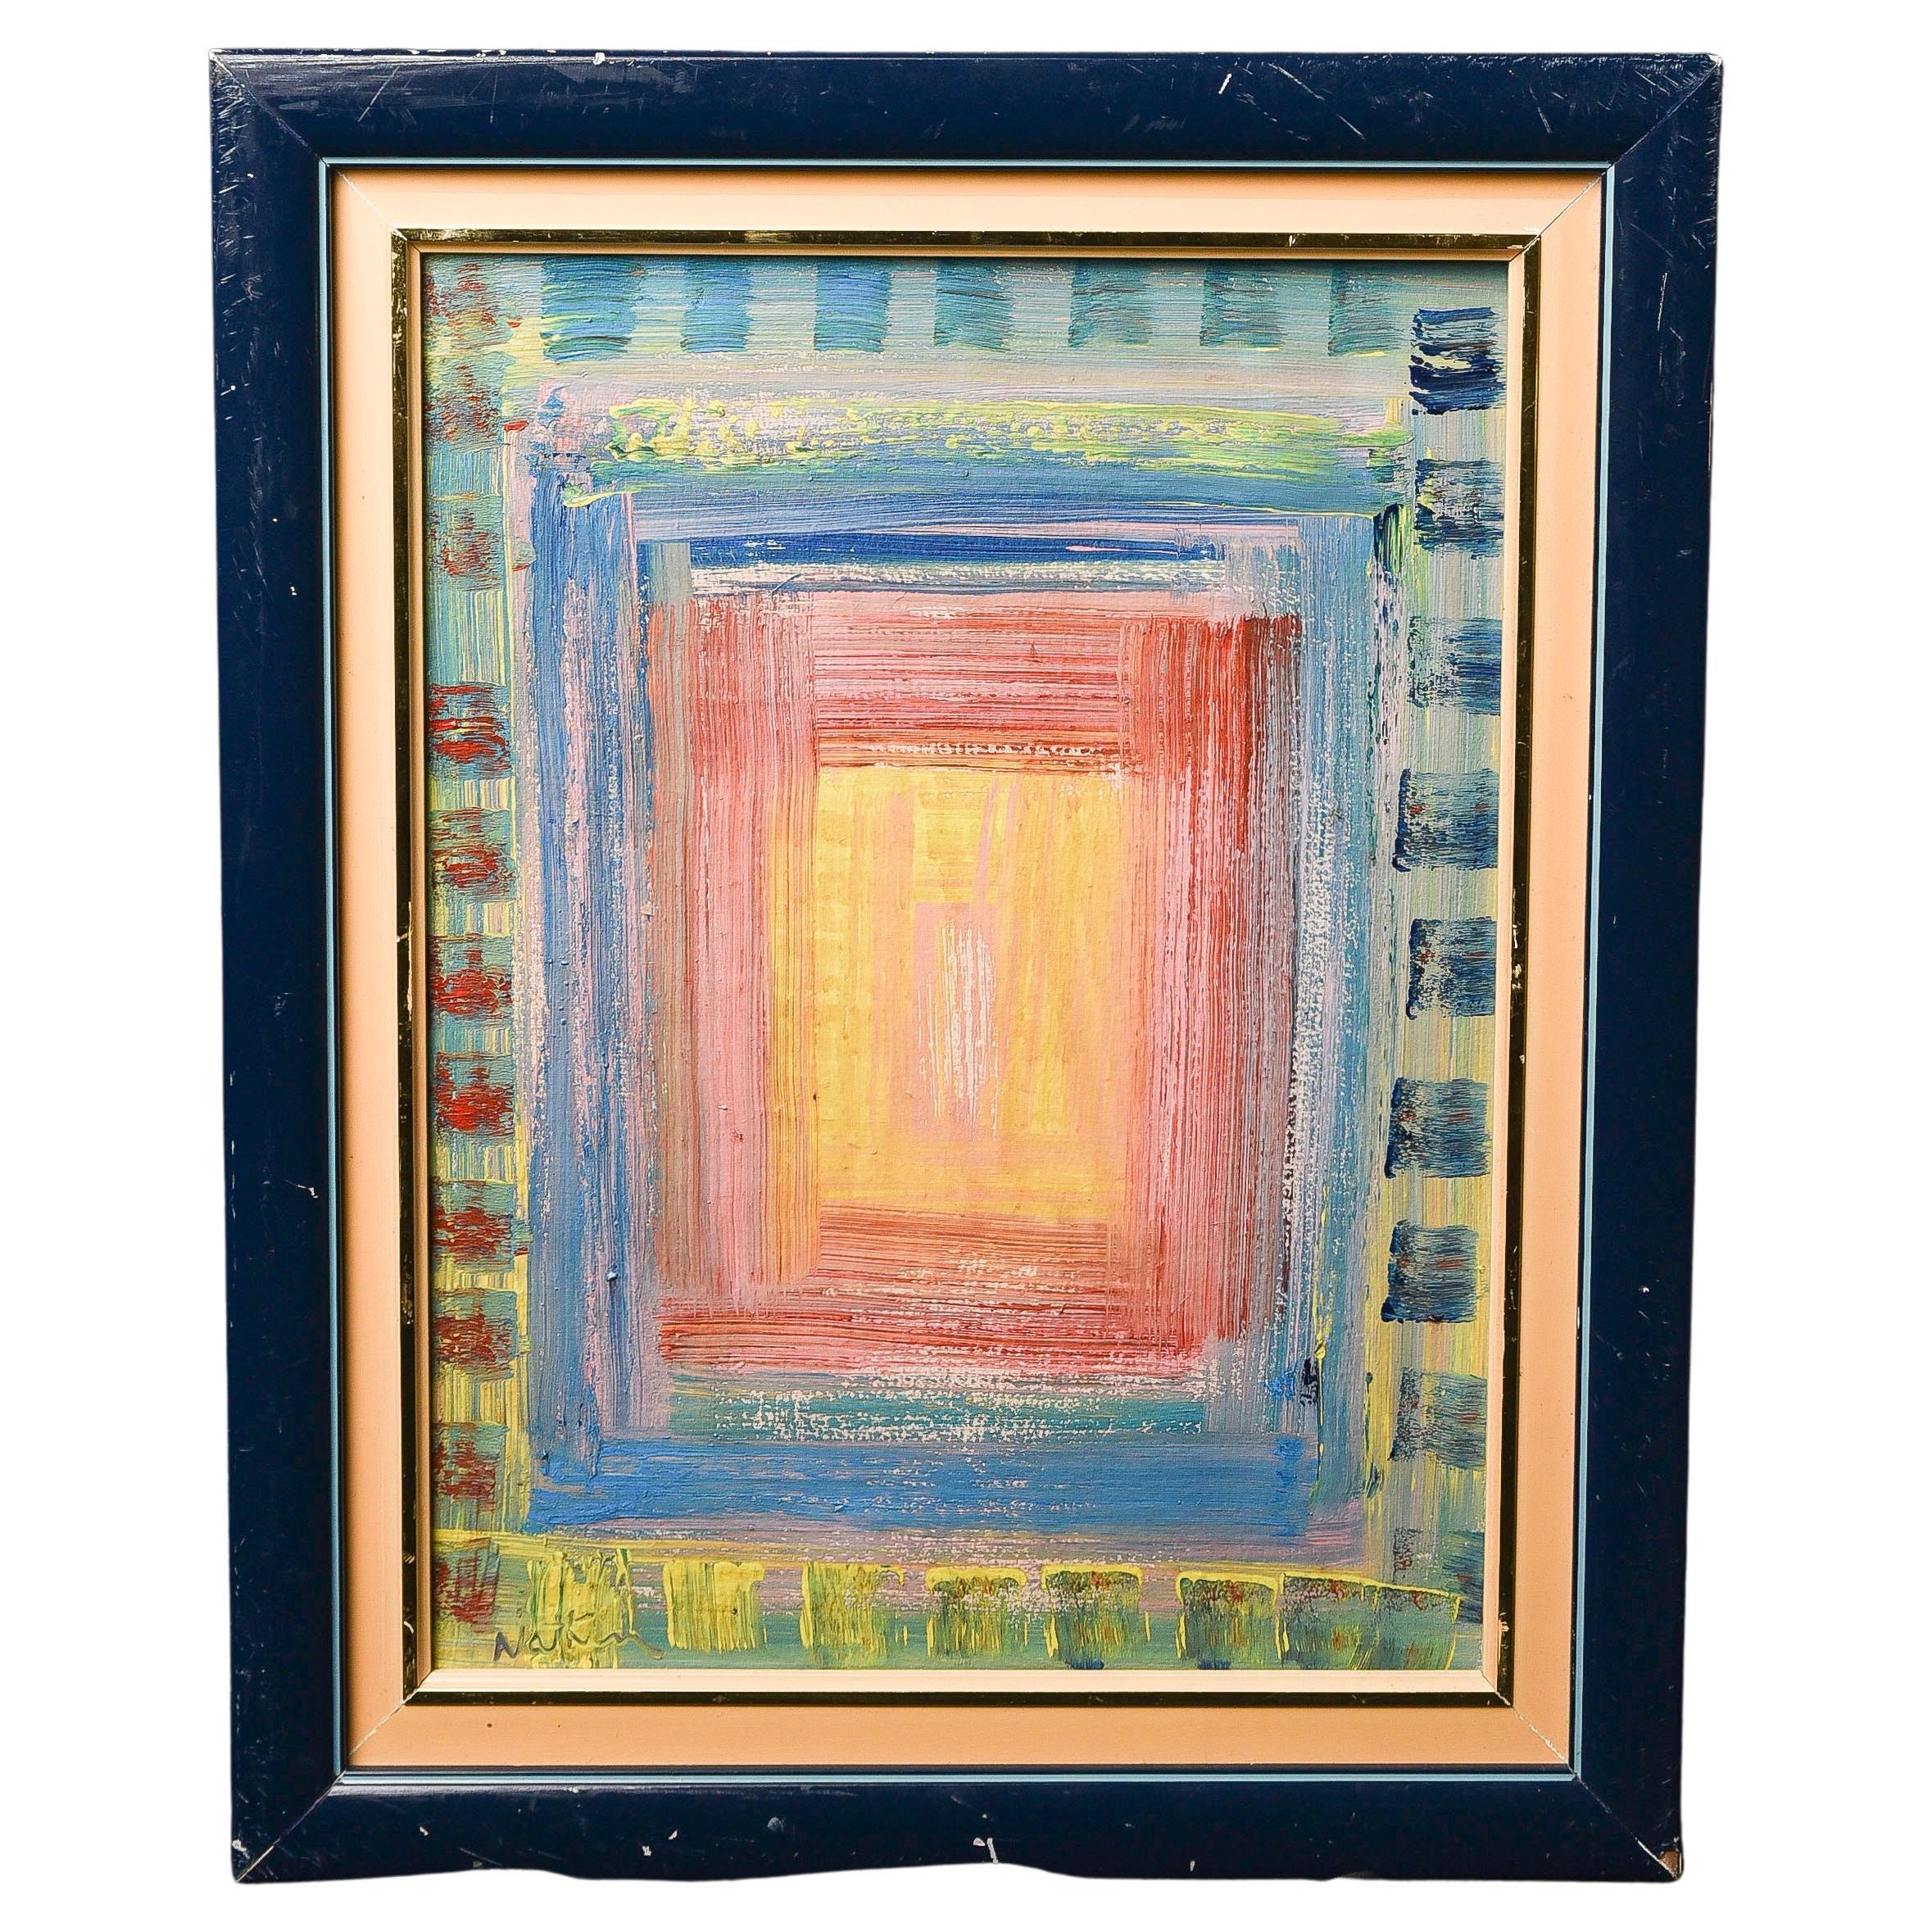 1960's Robert Natkin Painting in a Unique Style-Related to Portal Series - 9846